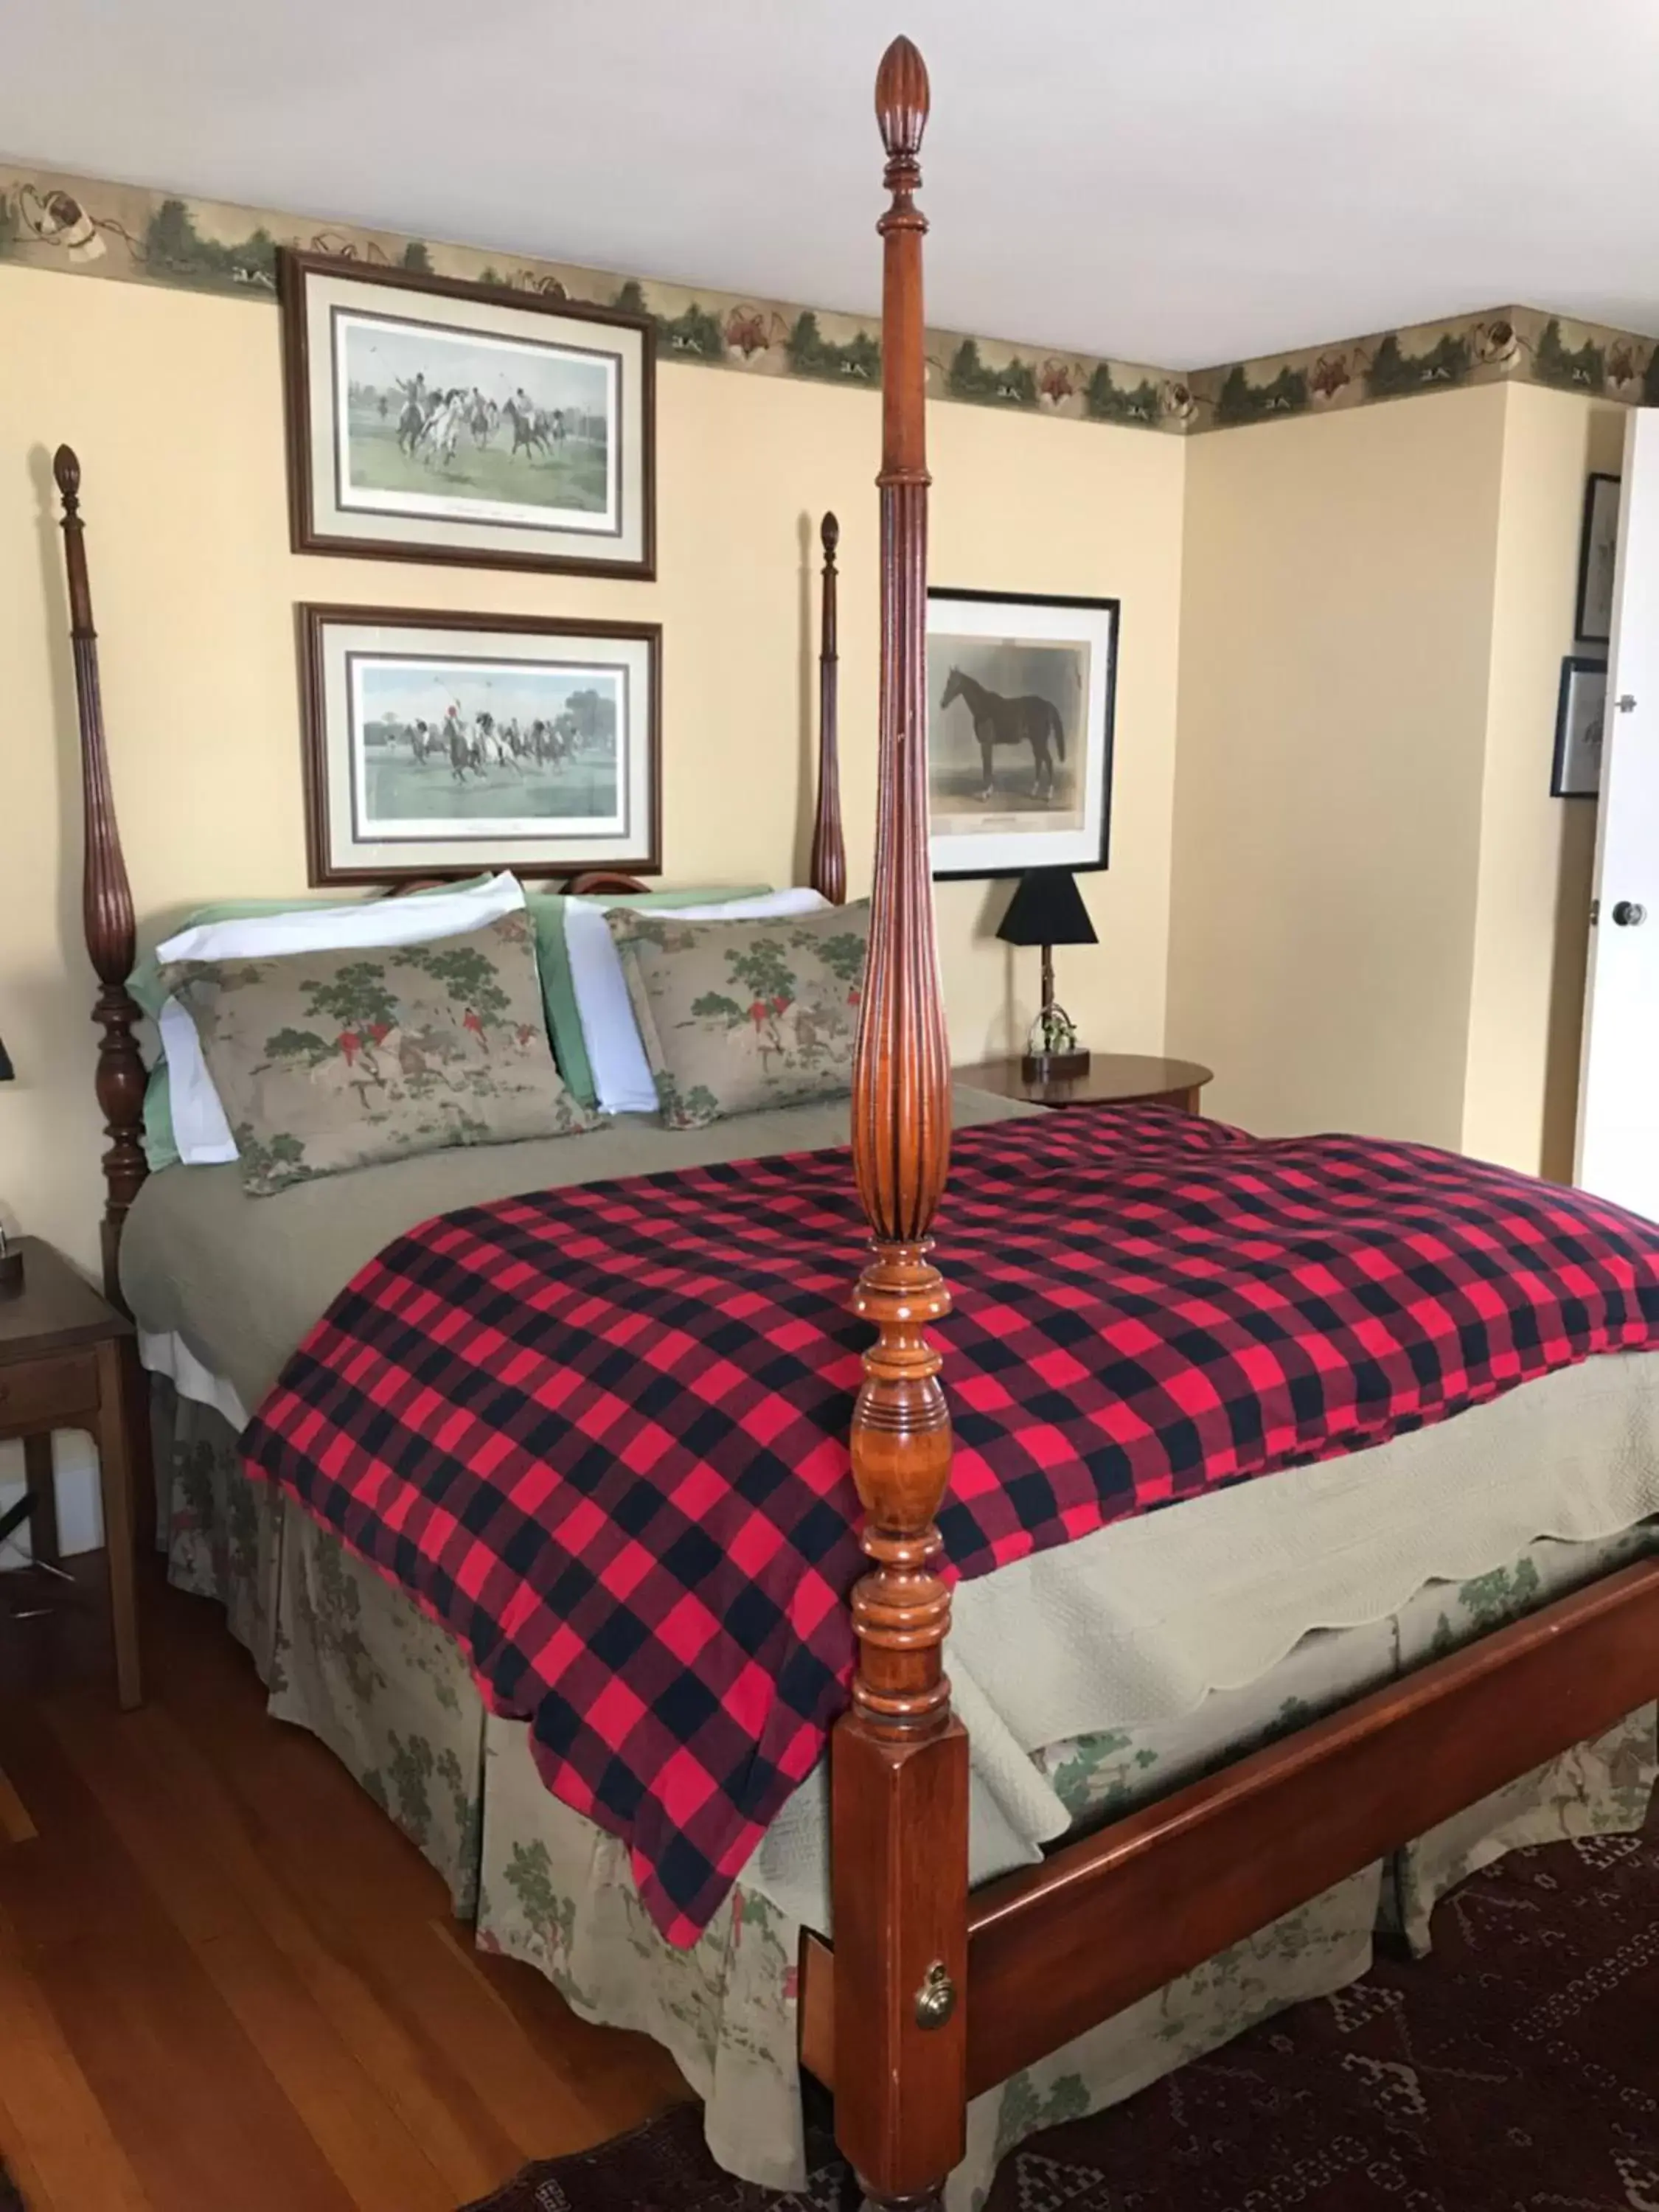 Bed in Topsides Bed & Breakfast